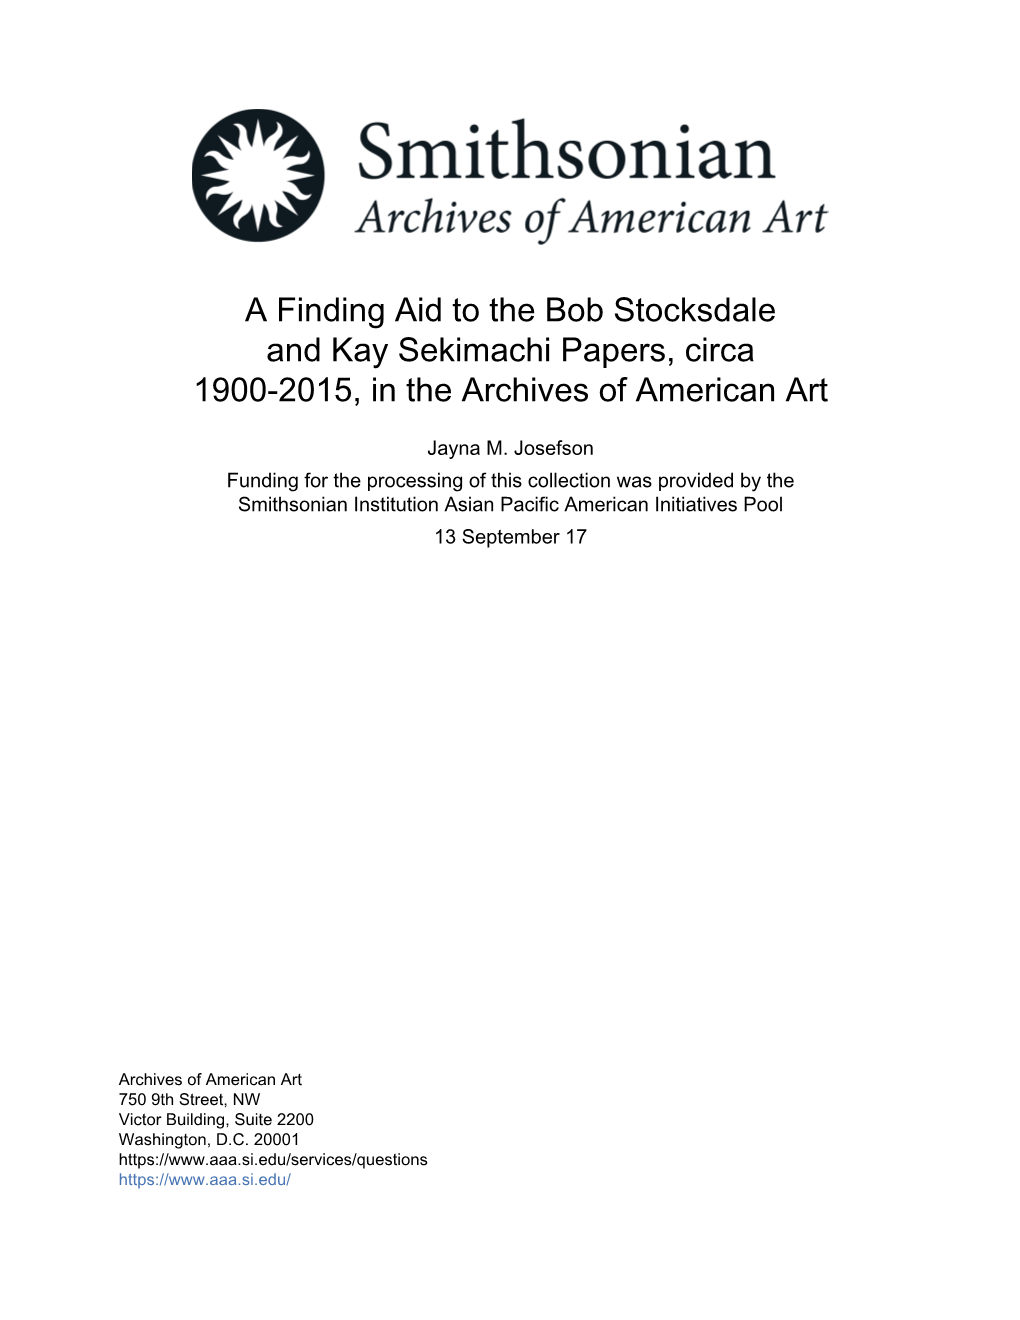 A Finding Aid to the Bob Stocksdale and Kay Sekimachi Papers, Circa 1900-2015, in the Archives of American Art